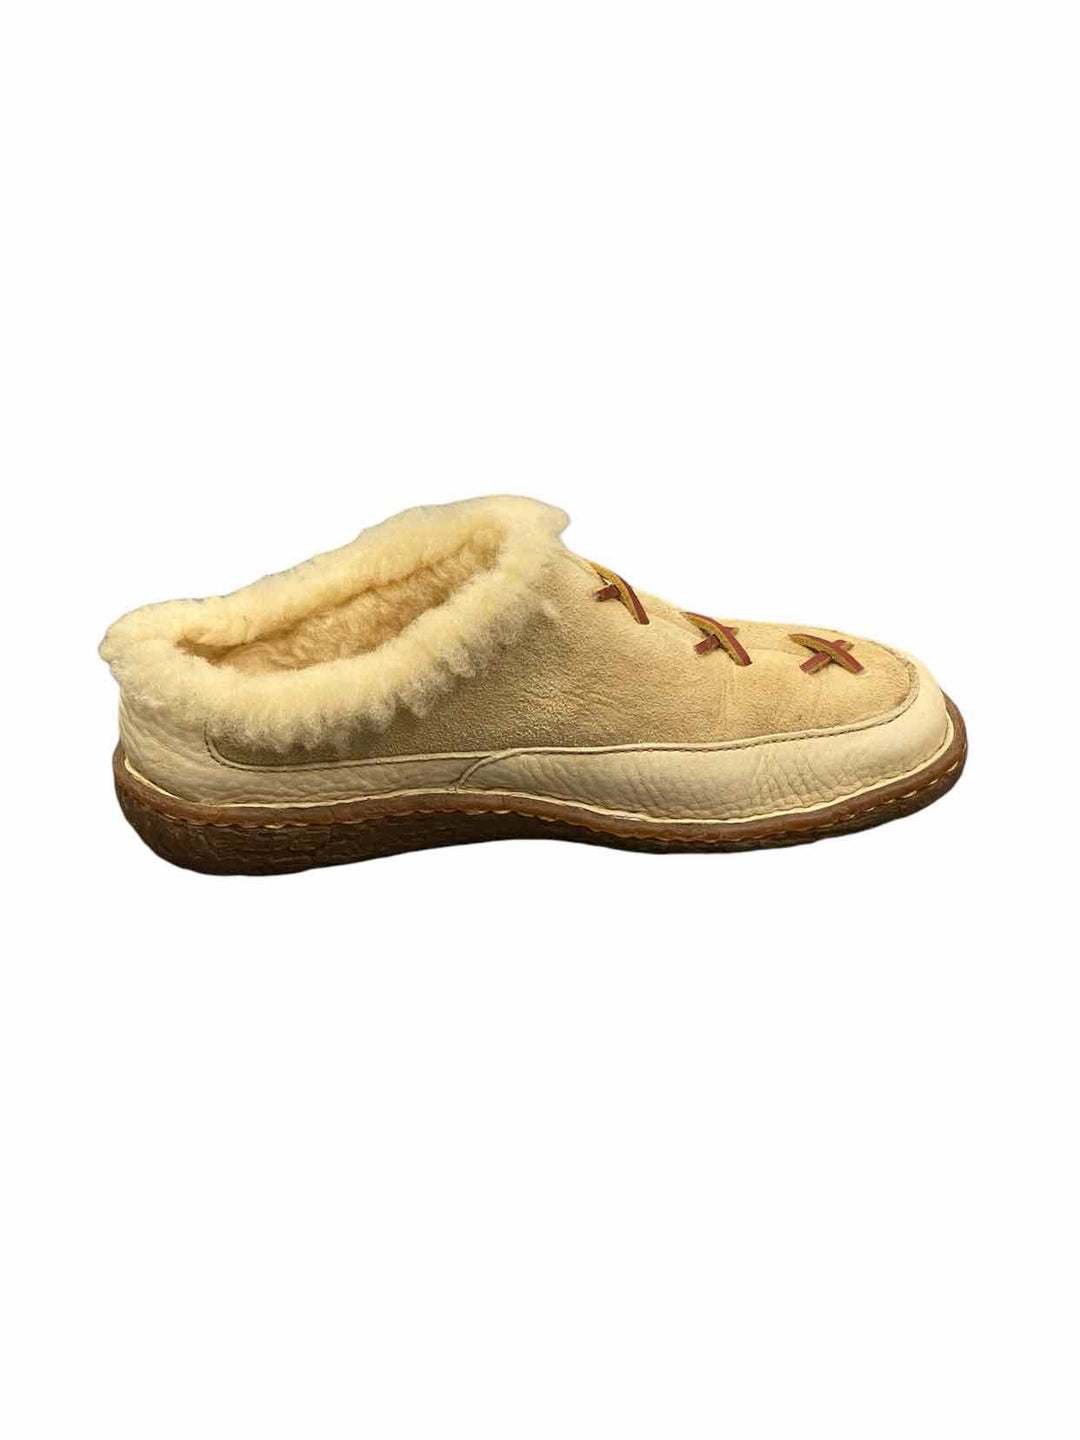 Born Shoe Size 6.5 Cream Leather Slippers